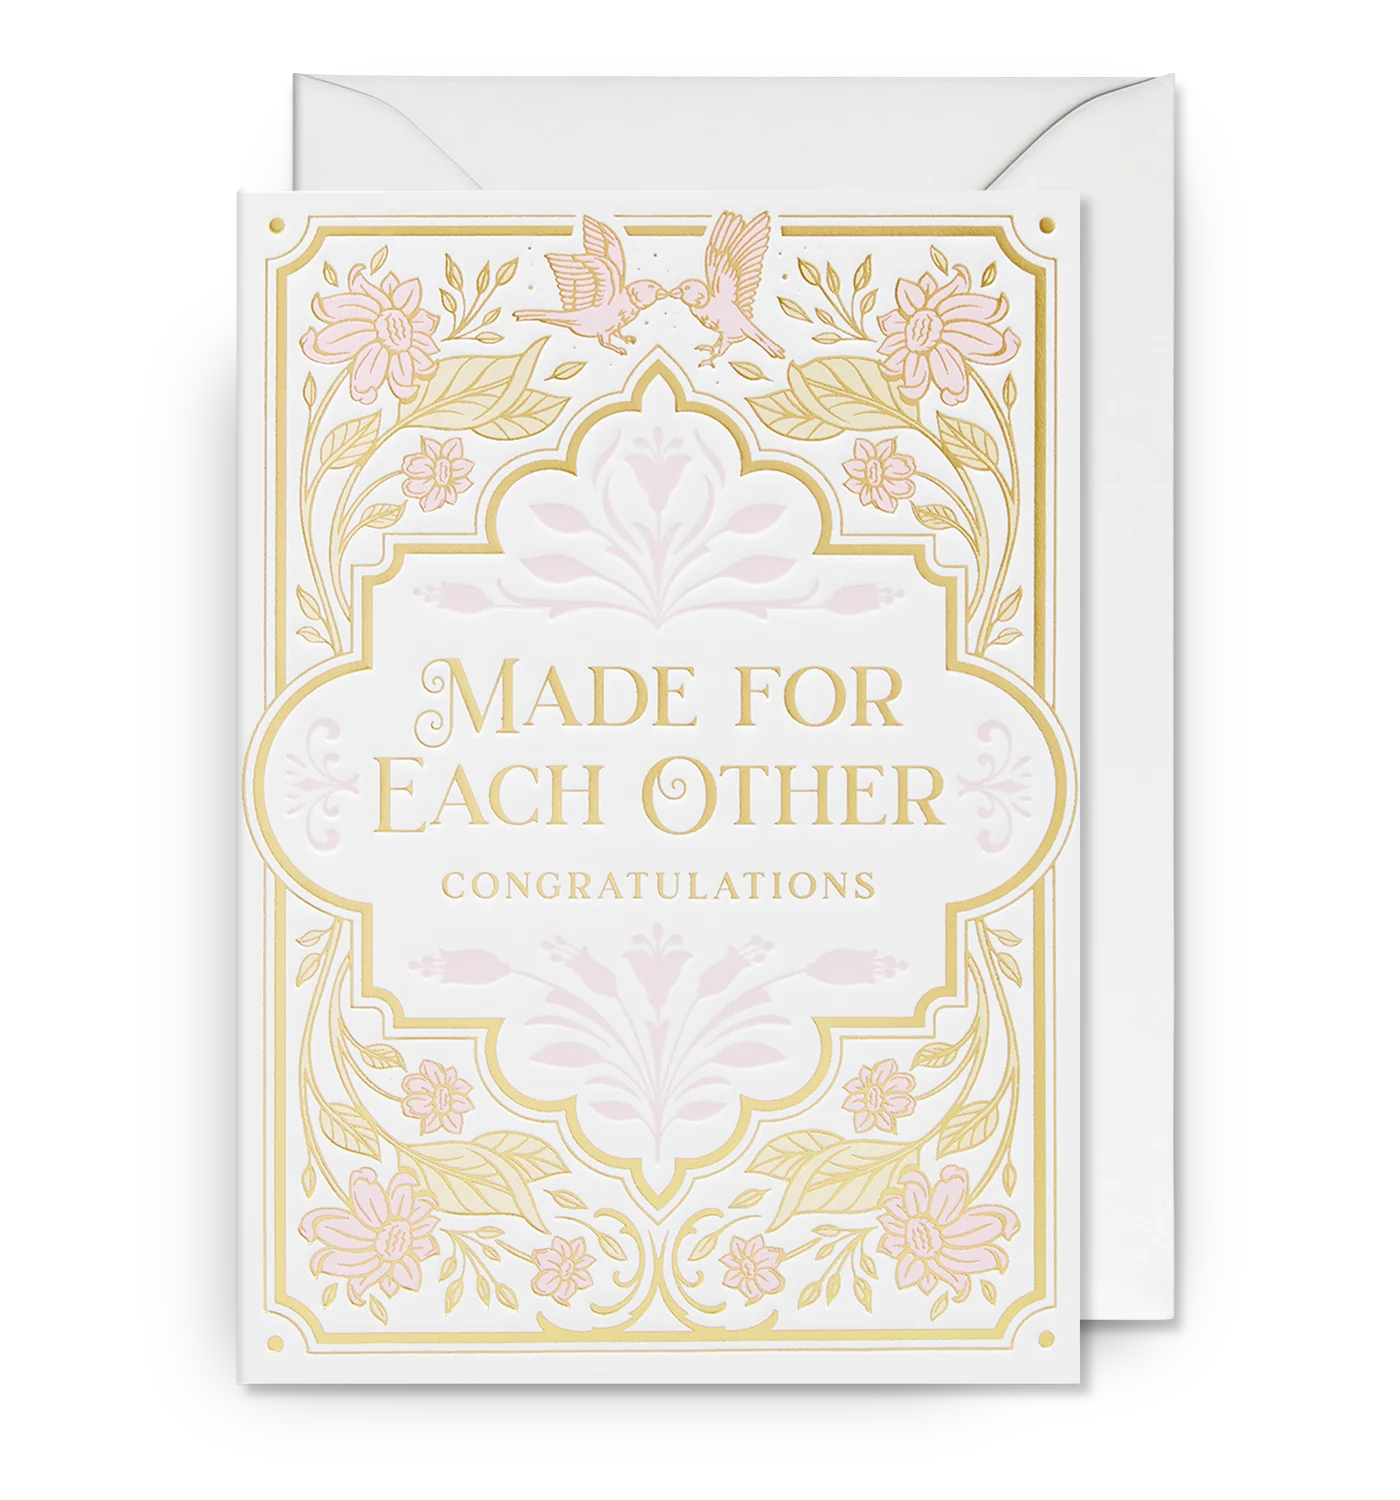 Made For Each Other Congratulations on Wedding Card by Tobias Saul